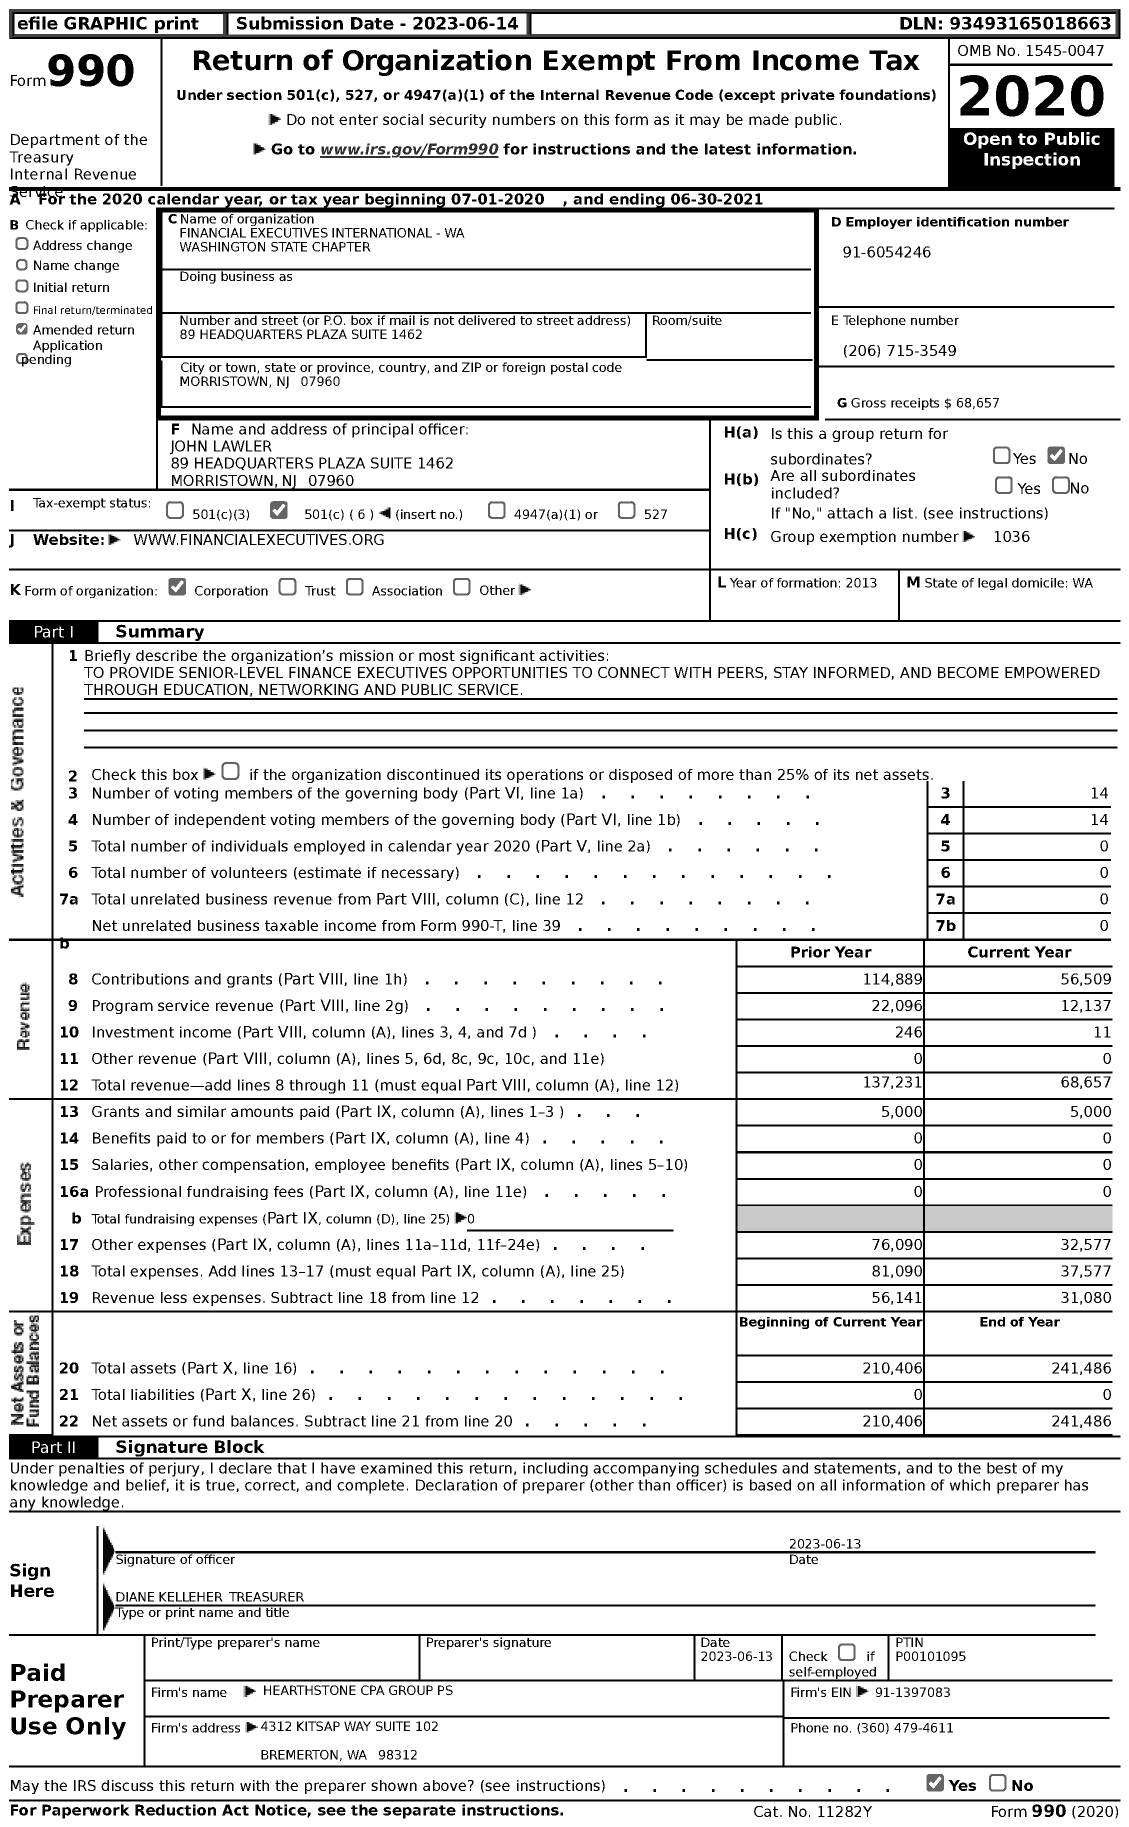 Image of first page of 2020 Form 990 for Financial Executives International Washington State Chapter